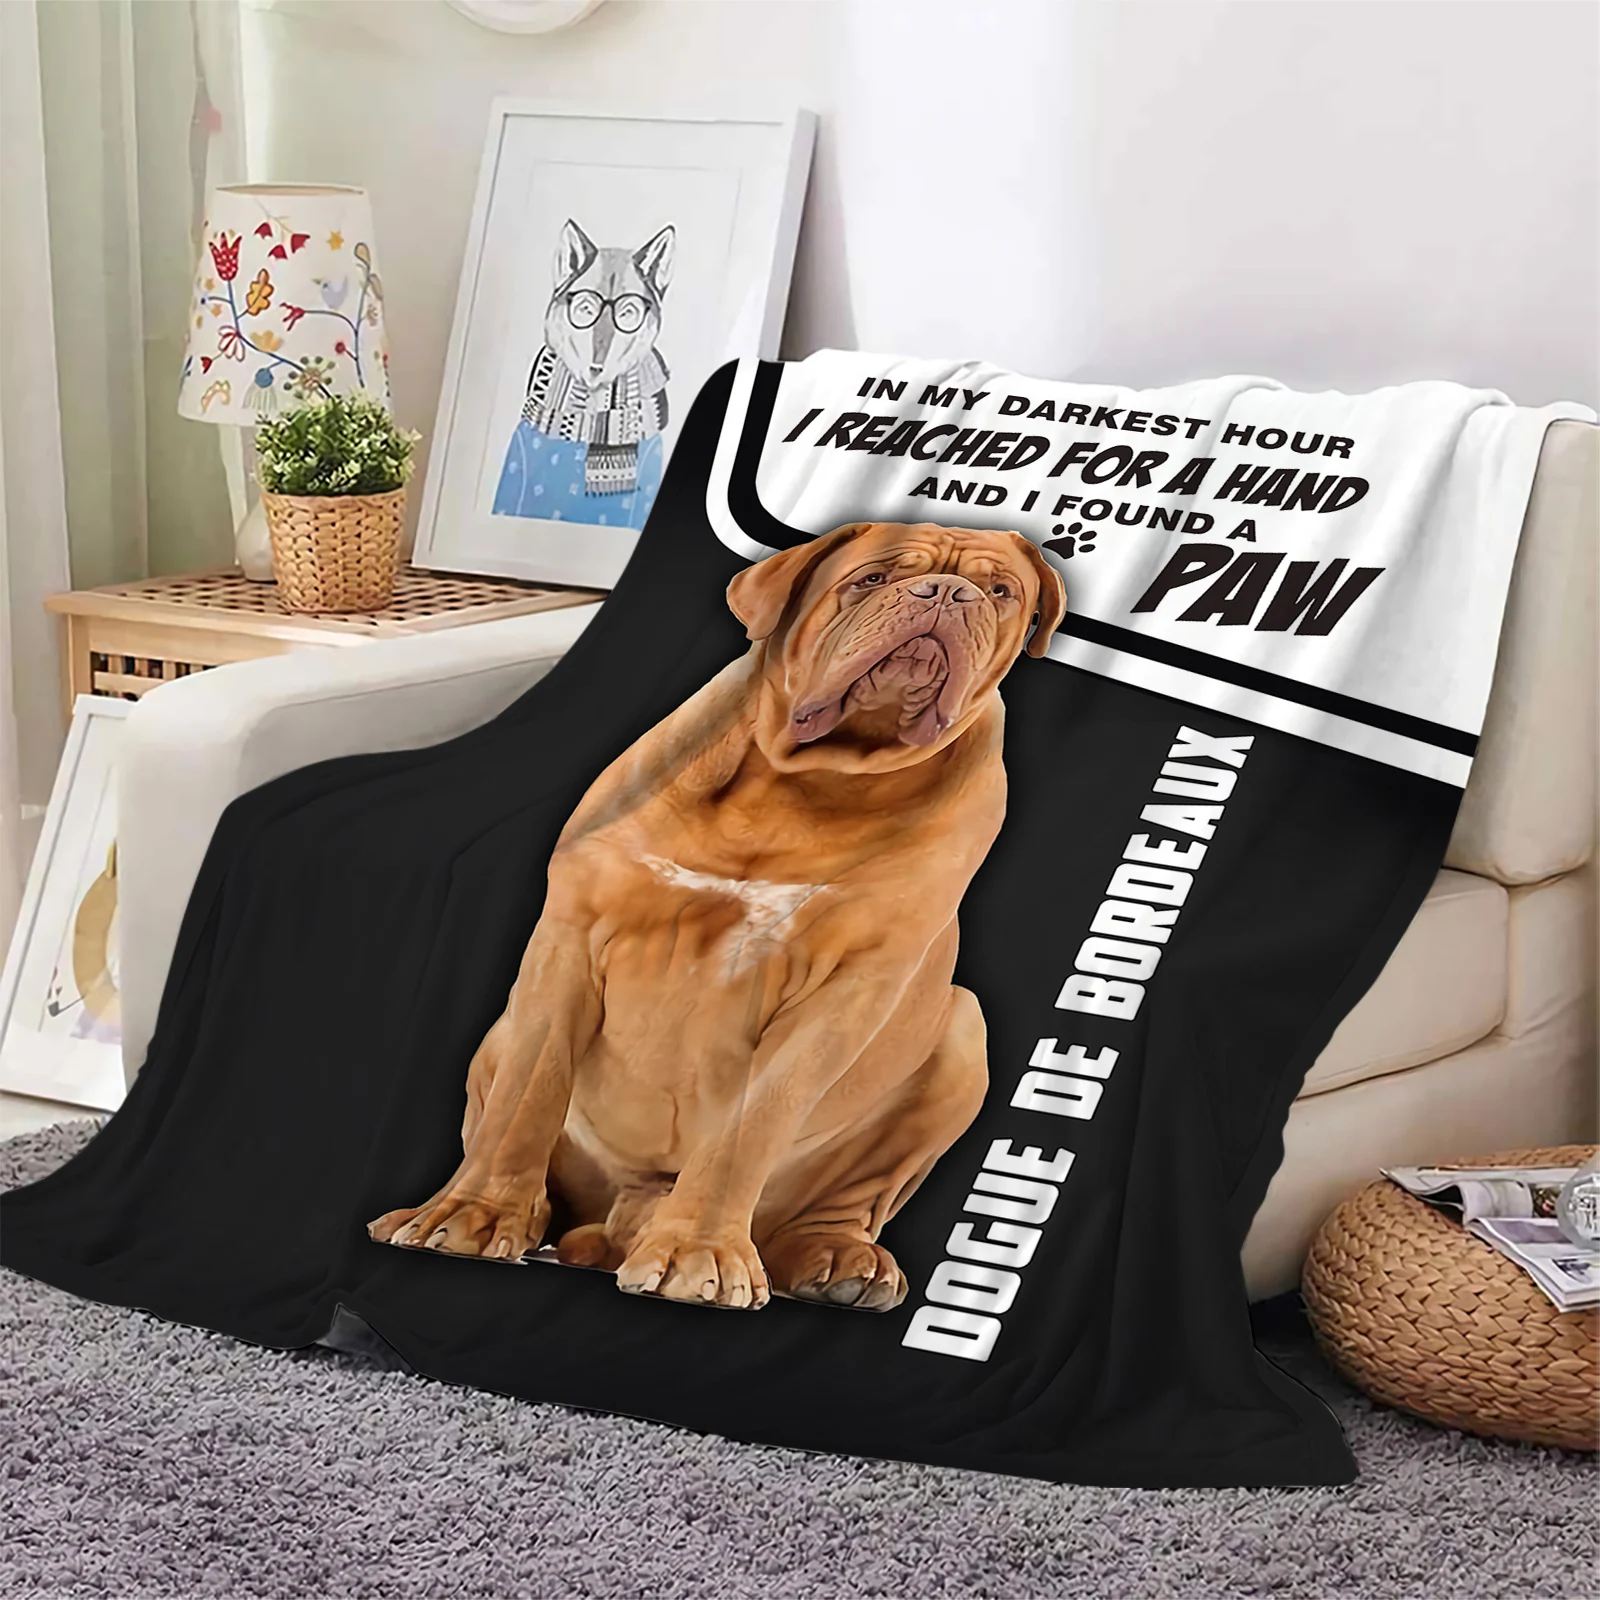 

Dogue De Bordeaux Flannel Blankets I Found A Paw 3D Printed Throw Blanket Office Nap Travel Portable Quilts Dropshipping